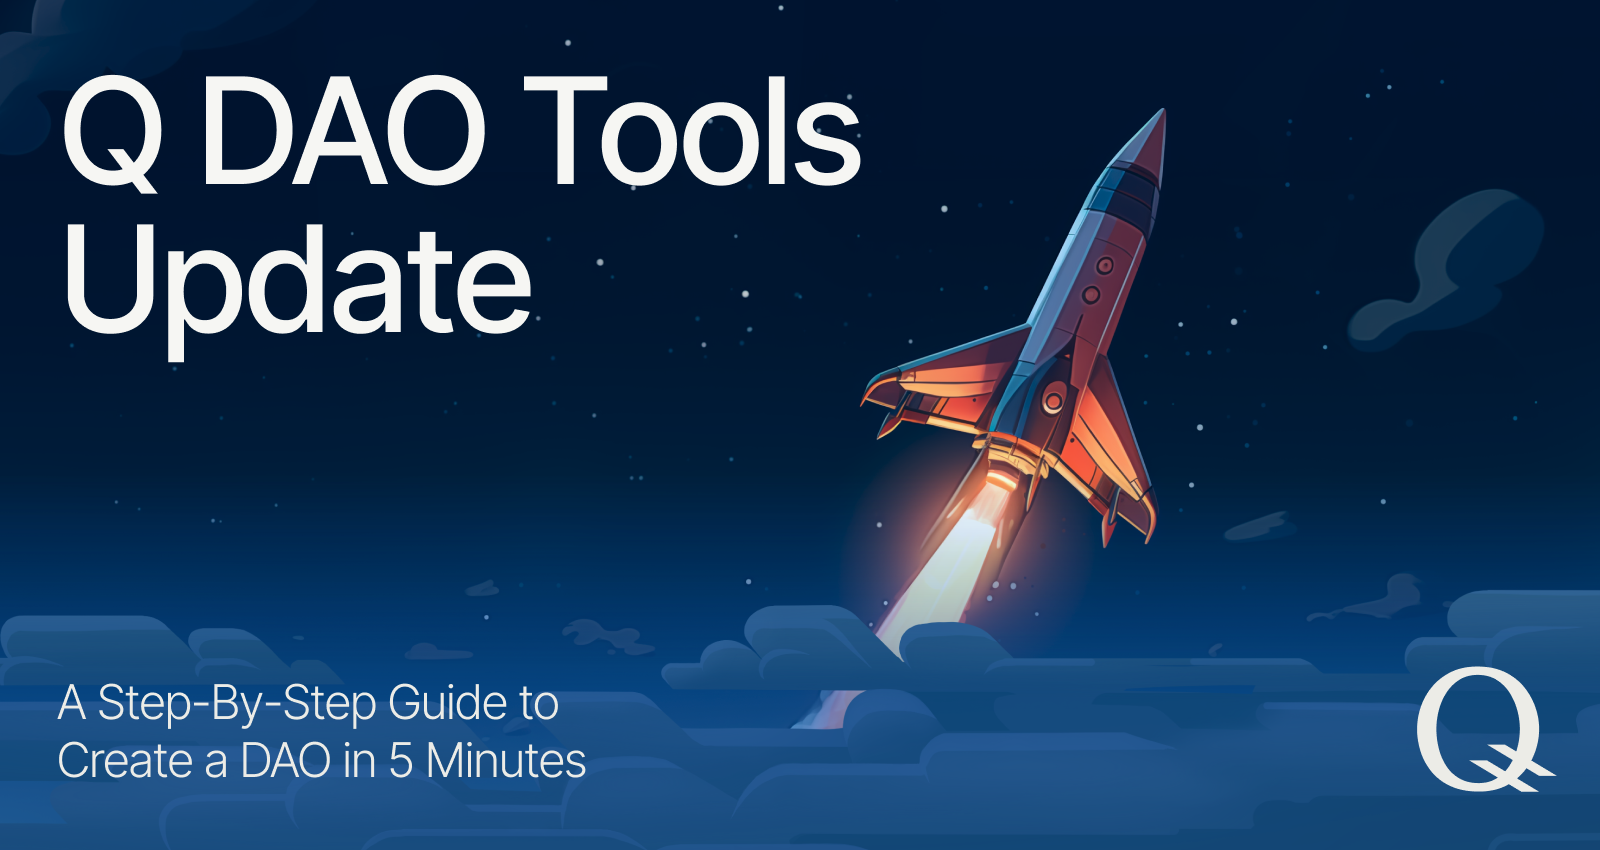 Q DAO Tools Update: A Step-By-Step Guide to Create a DAO in 5 Minutes